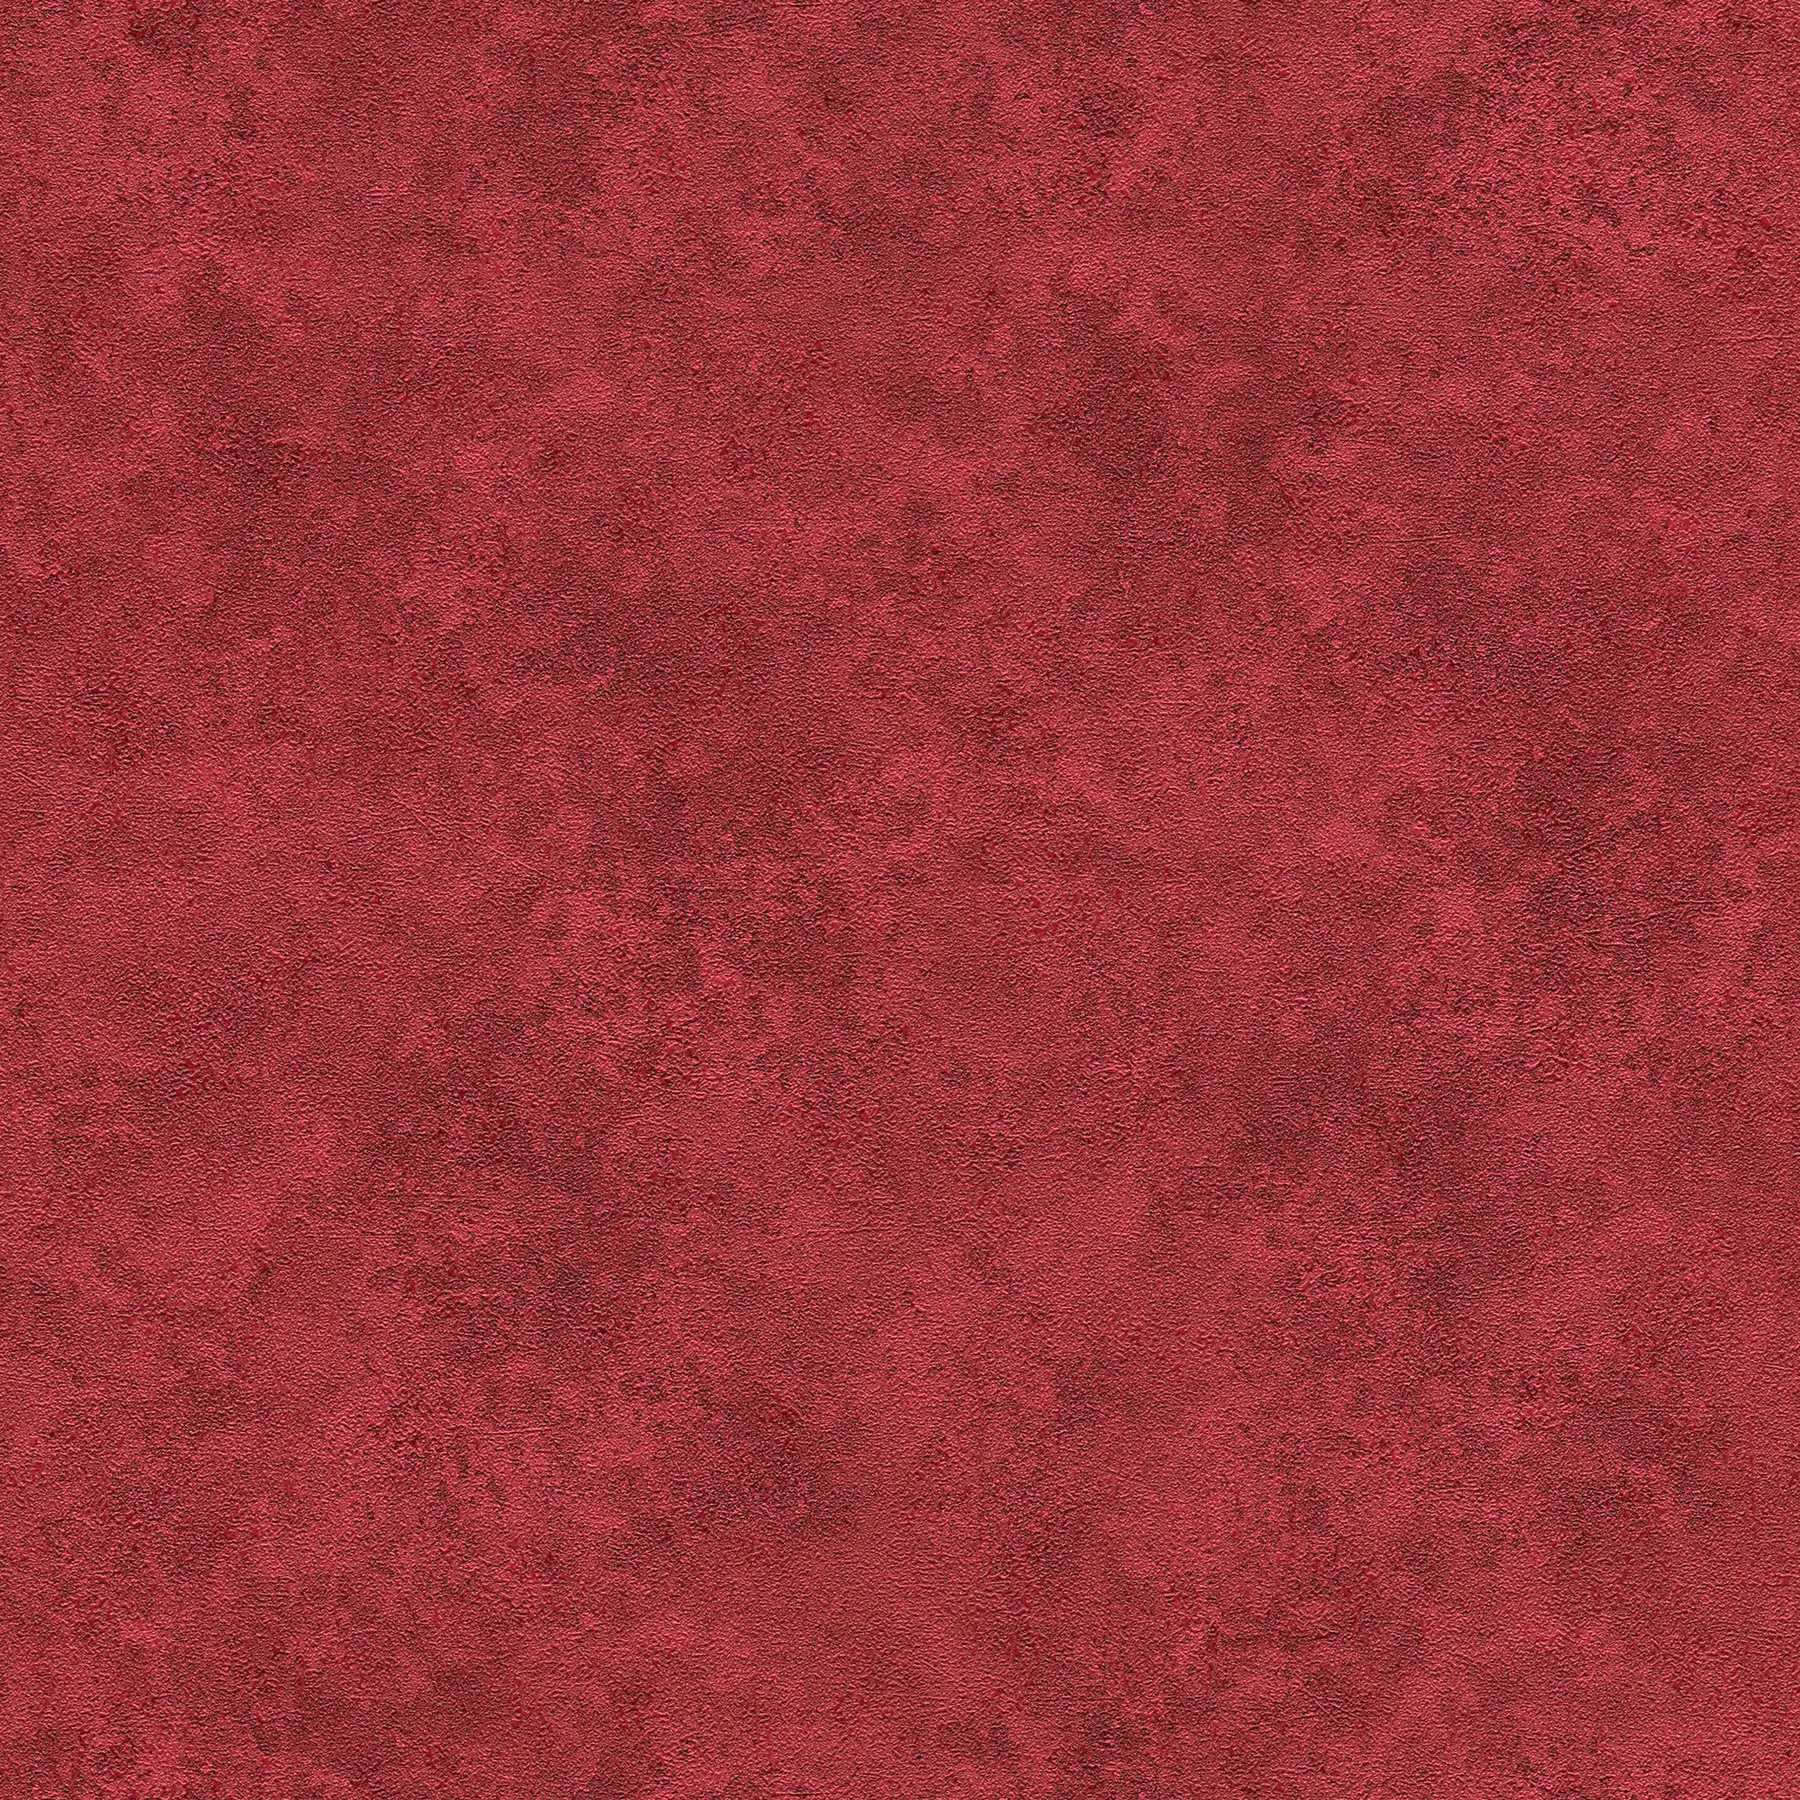 Plain wallpaper colour shaded, natural texture pattern - red
